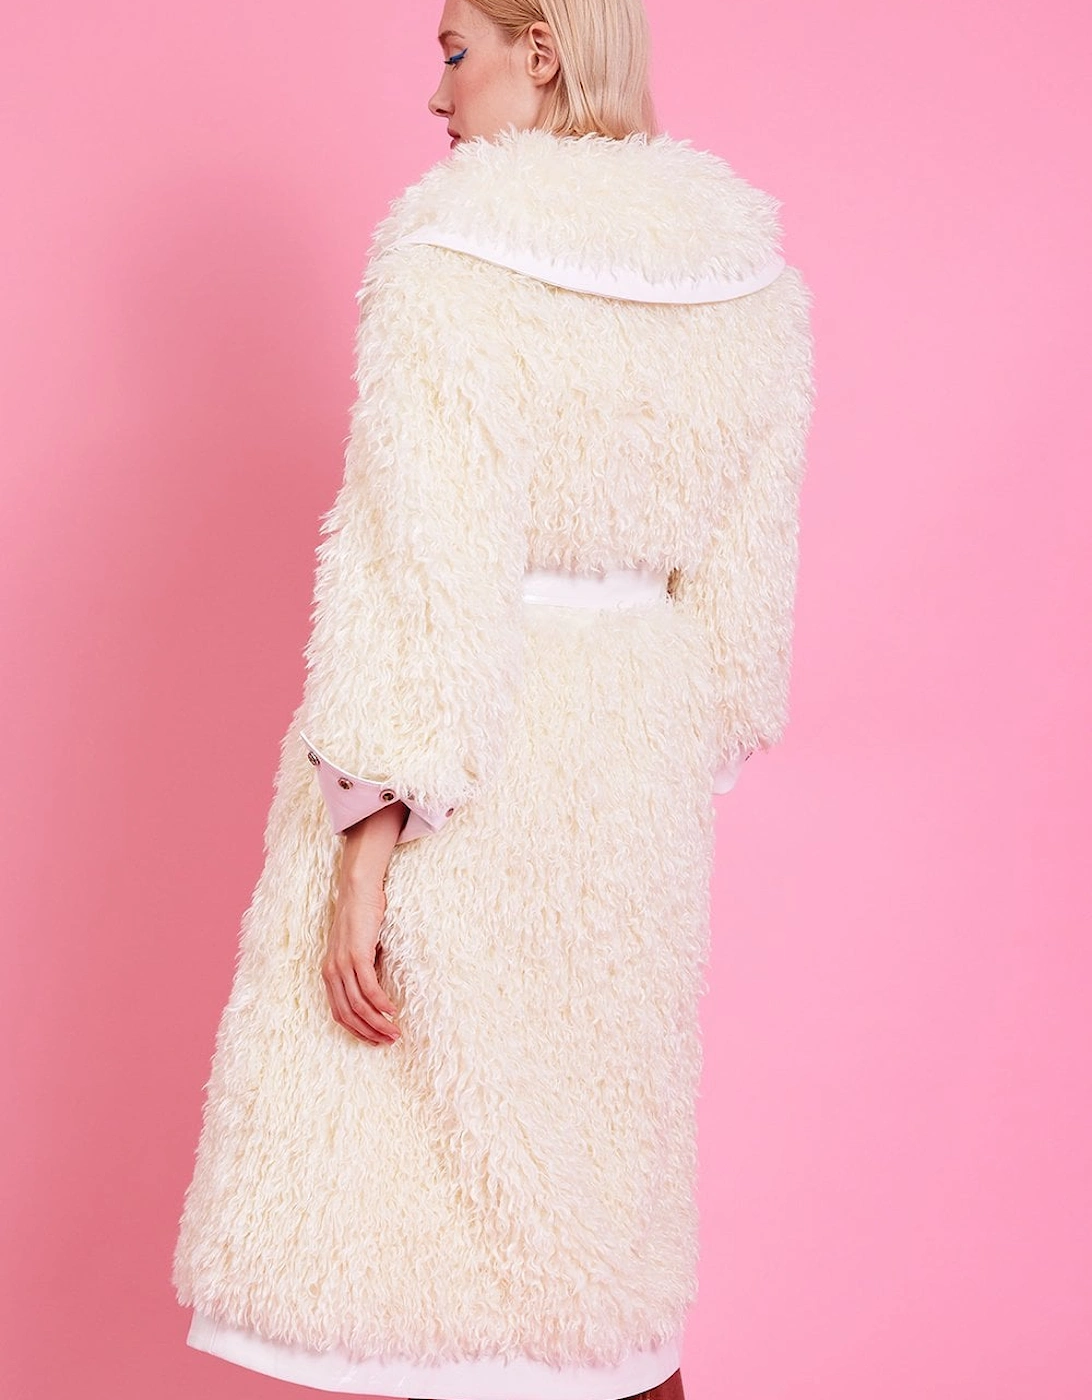 Knitted Bamboo and Eco Leather Shearling Coat